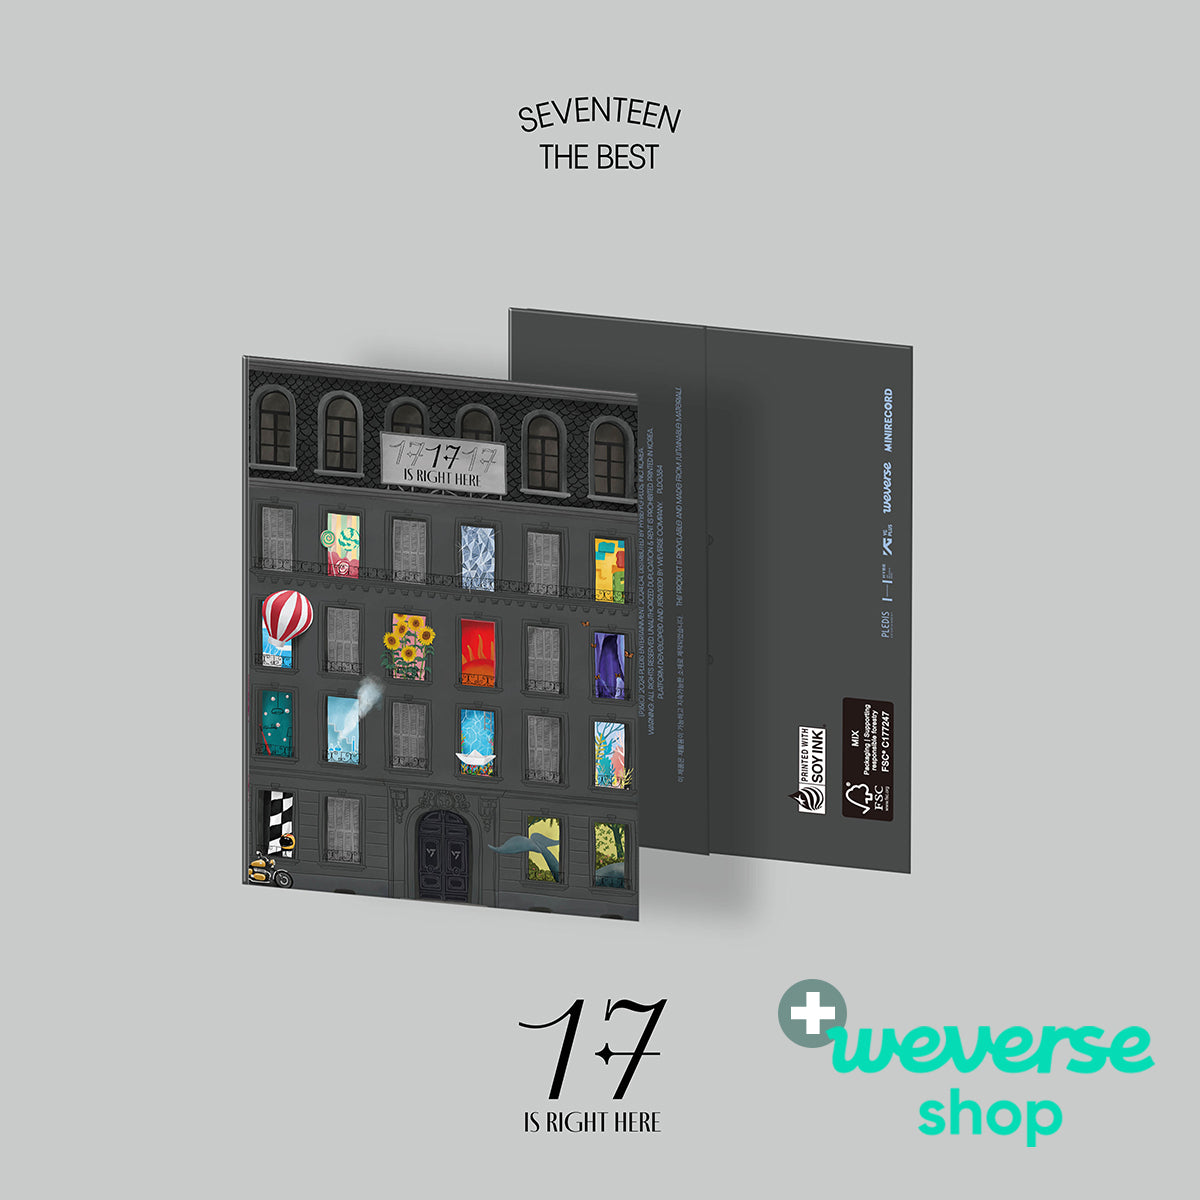 SEVENTEEN - 17 IS RIGHT HERE (Weverse Albums ver.) + Weverse Shop P.O.B